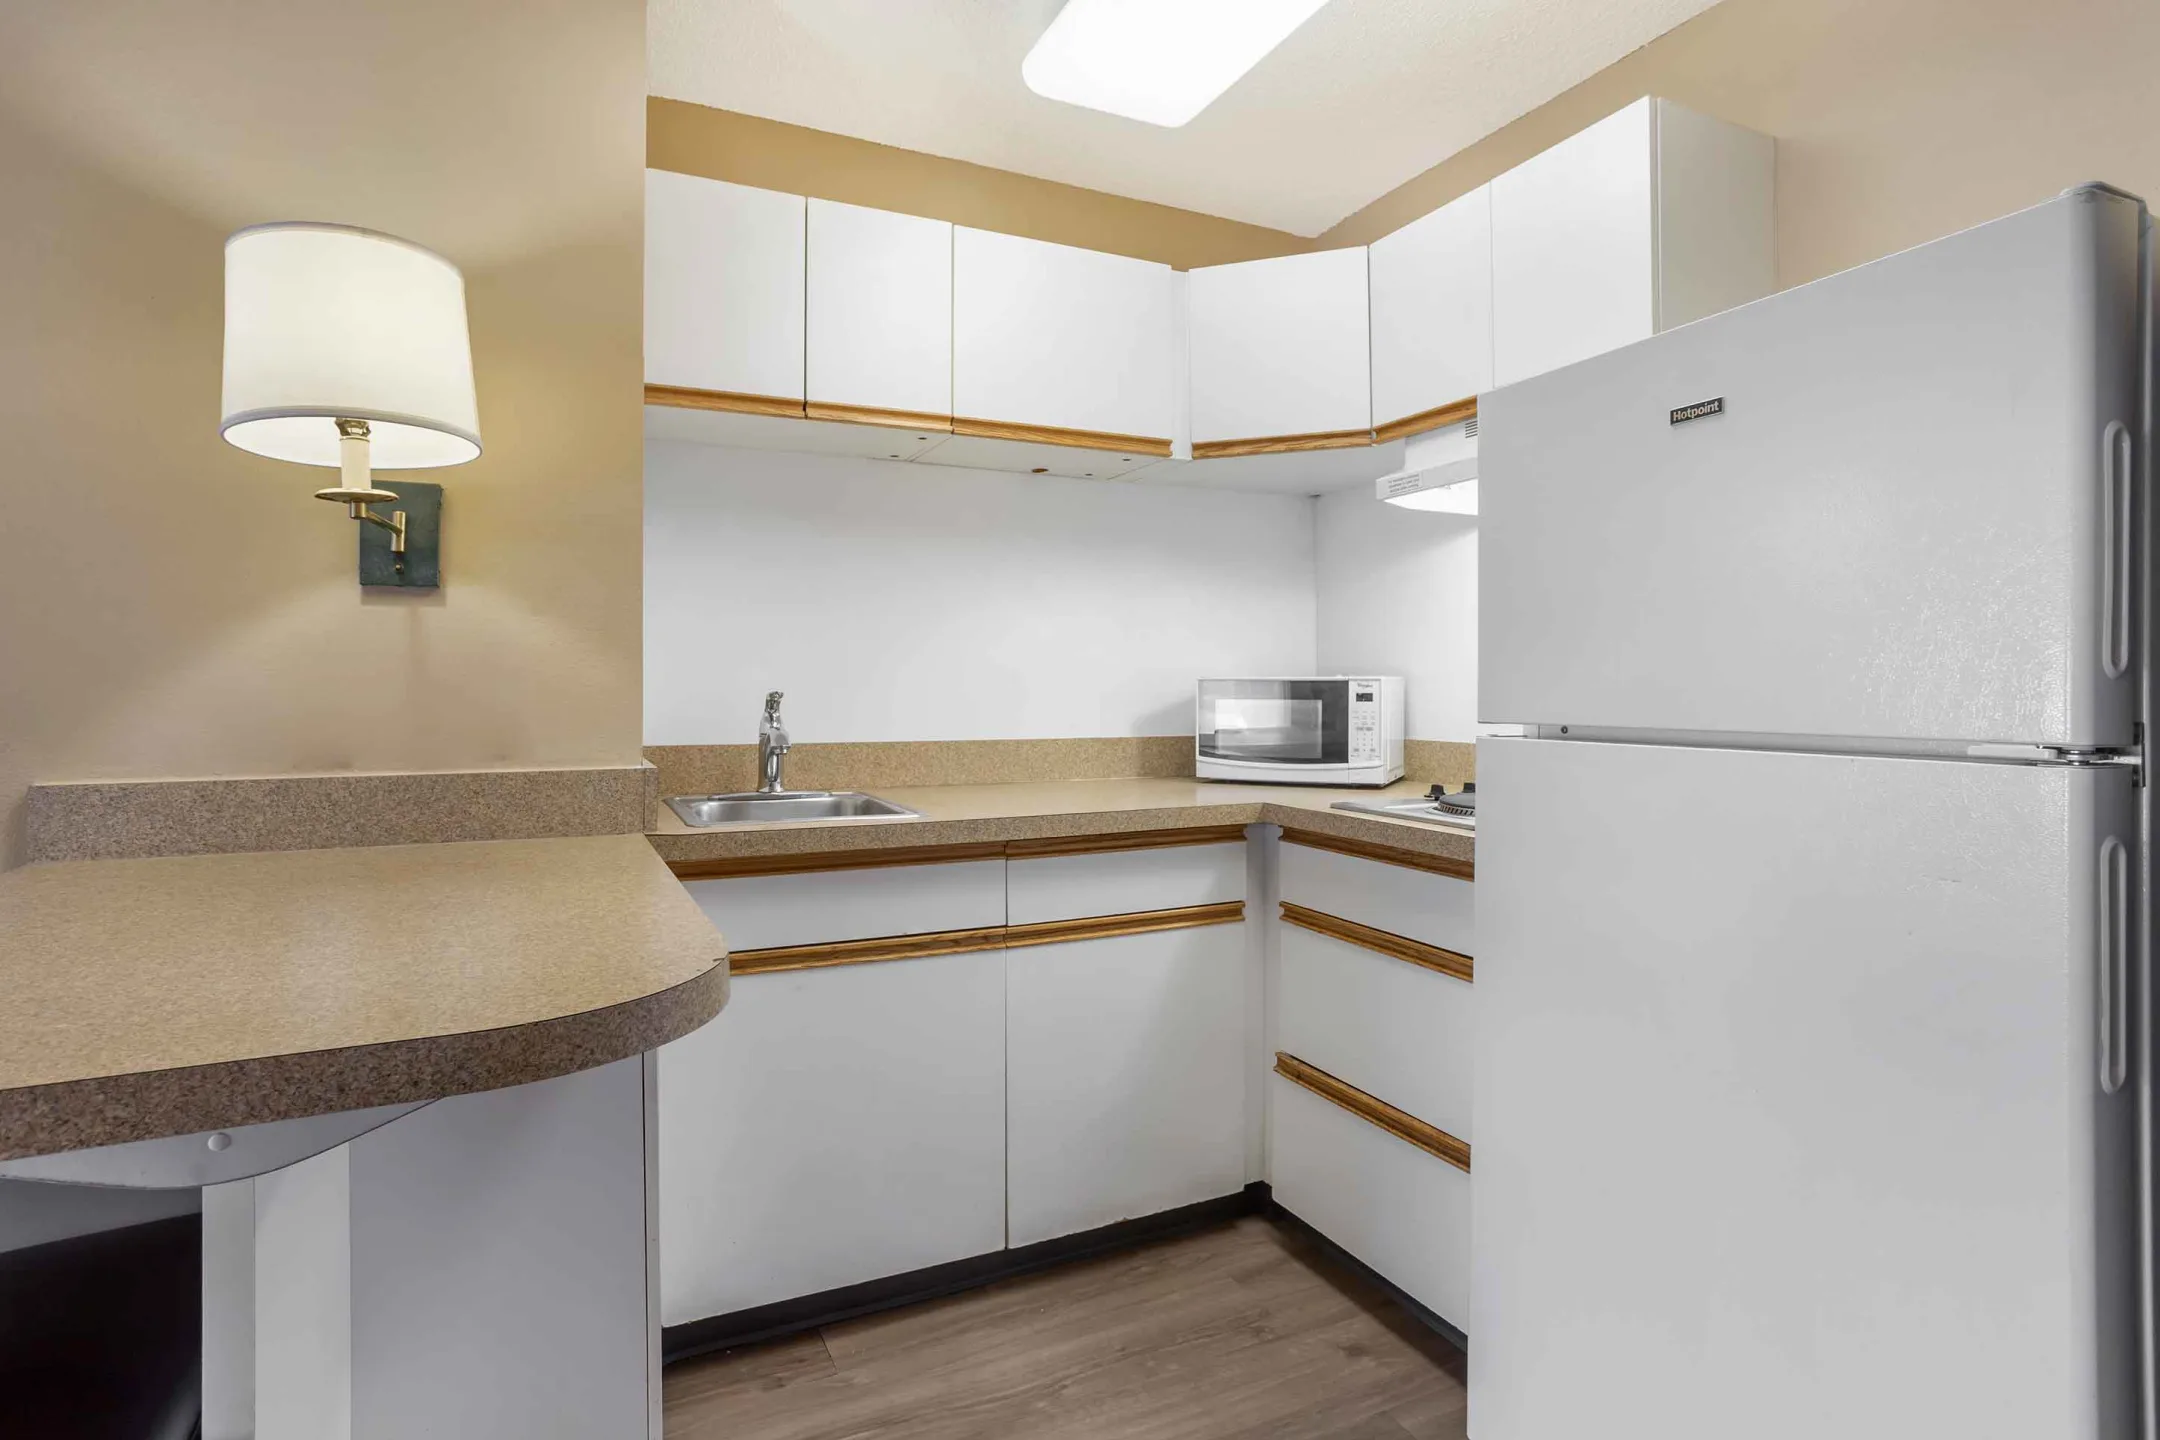 Kitchen - Furnished Studio - Meadowlands - East Rutherford - East Rutherford, NJ